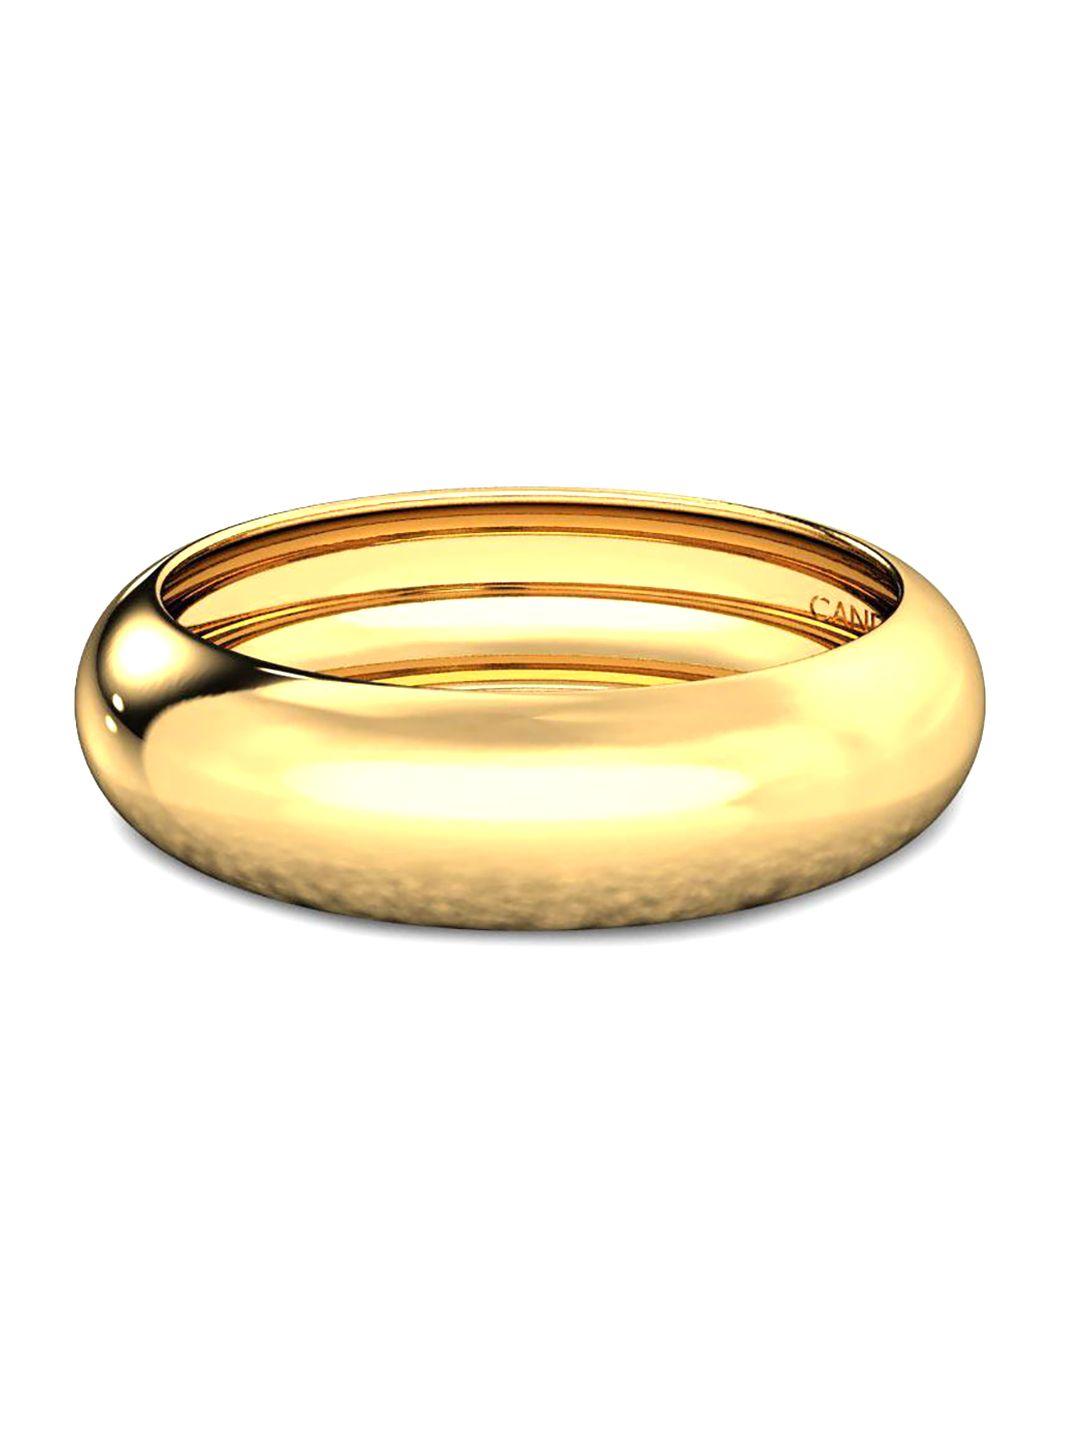 candere-a-kalyan-jewellers-company-18kt-gold-ring-1.73gm